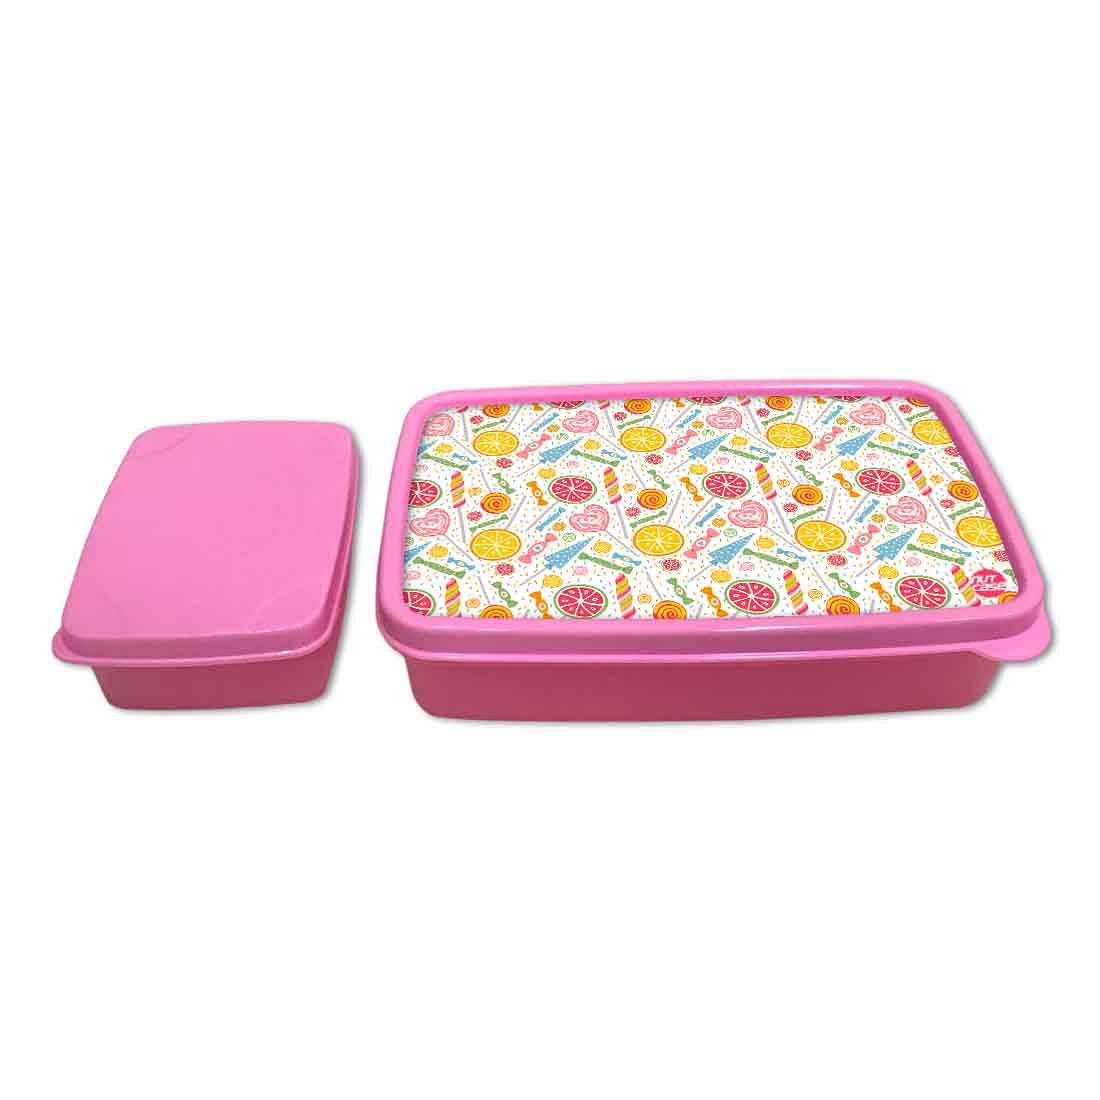 Plastic Best Snacks Biscuit Box for Kids School Lunch Box - Candy Nutcase